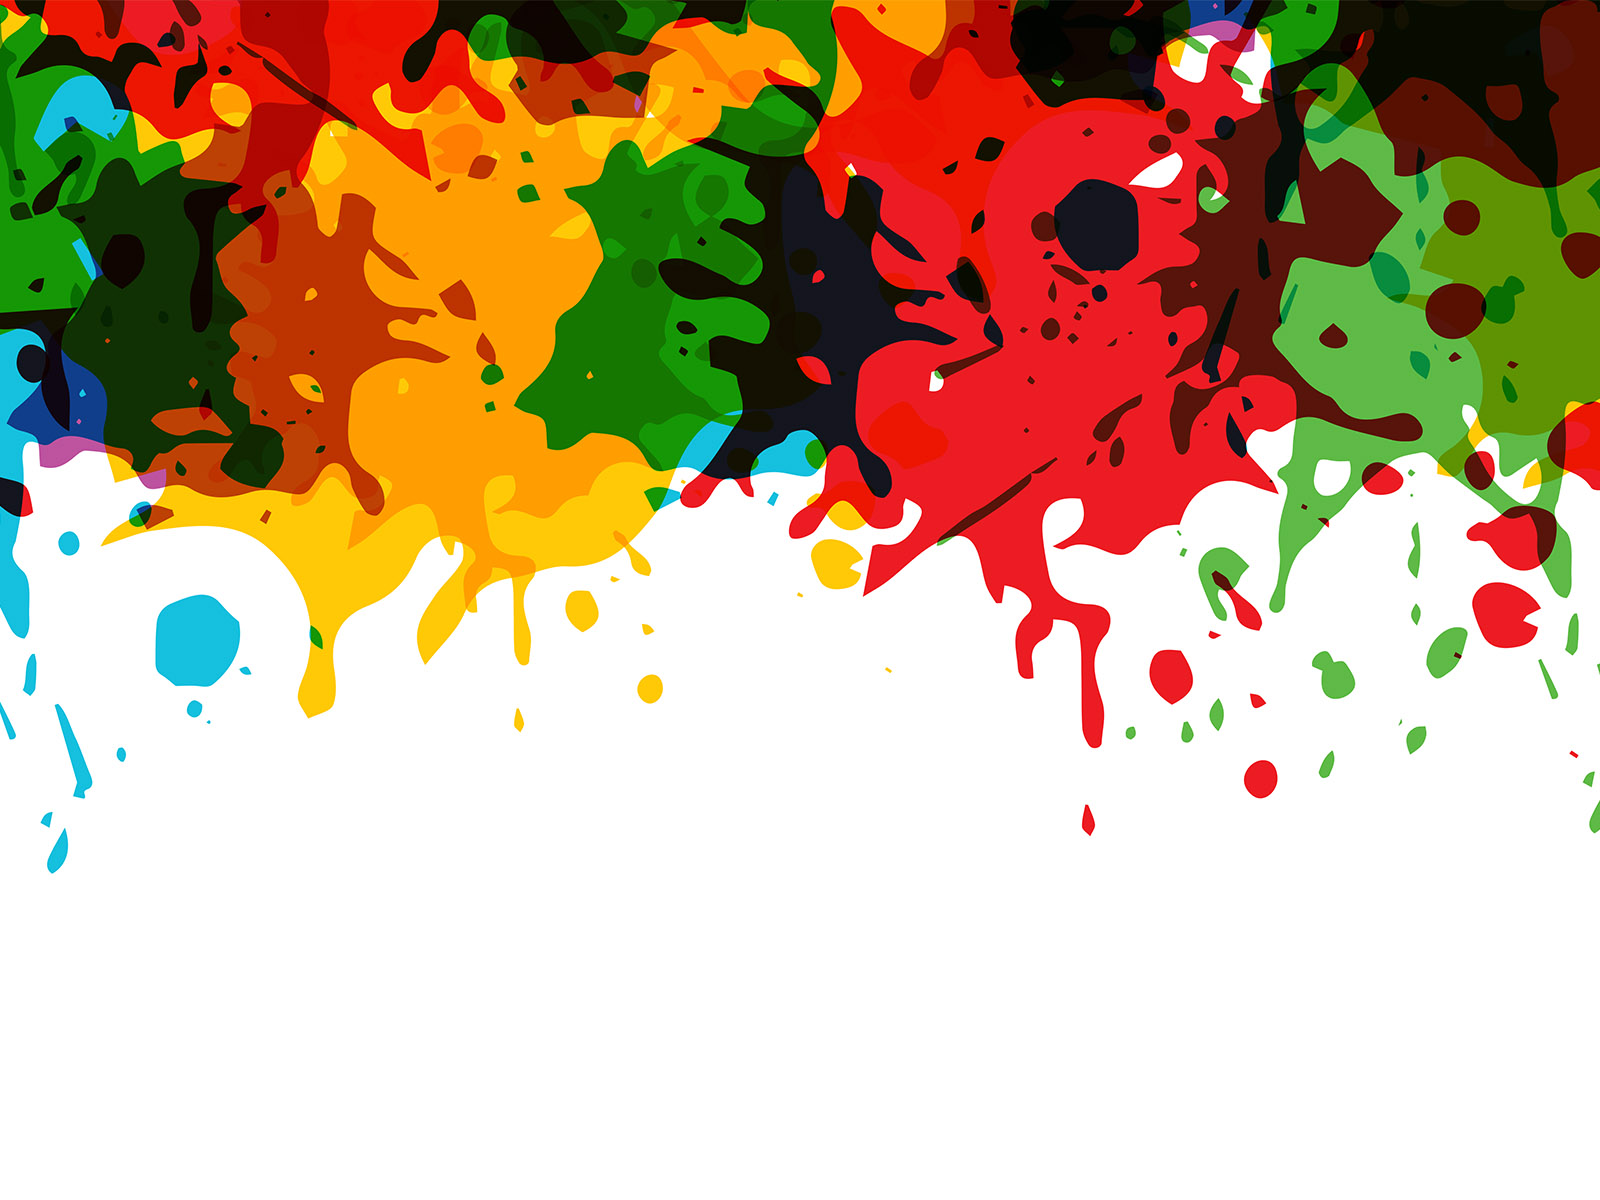 Artistic splashes Backgrounds | 3D, Design Templates | Free PPT Grounds